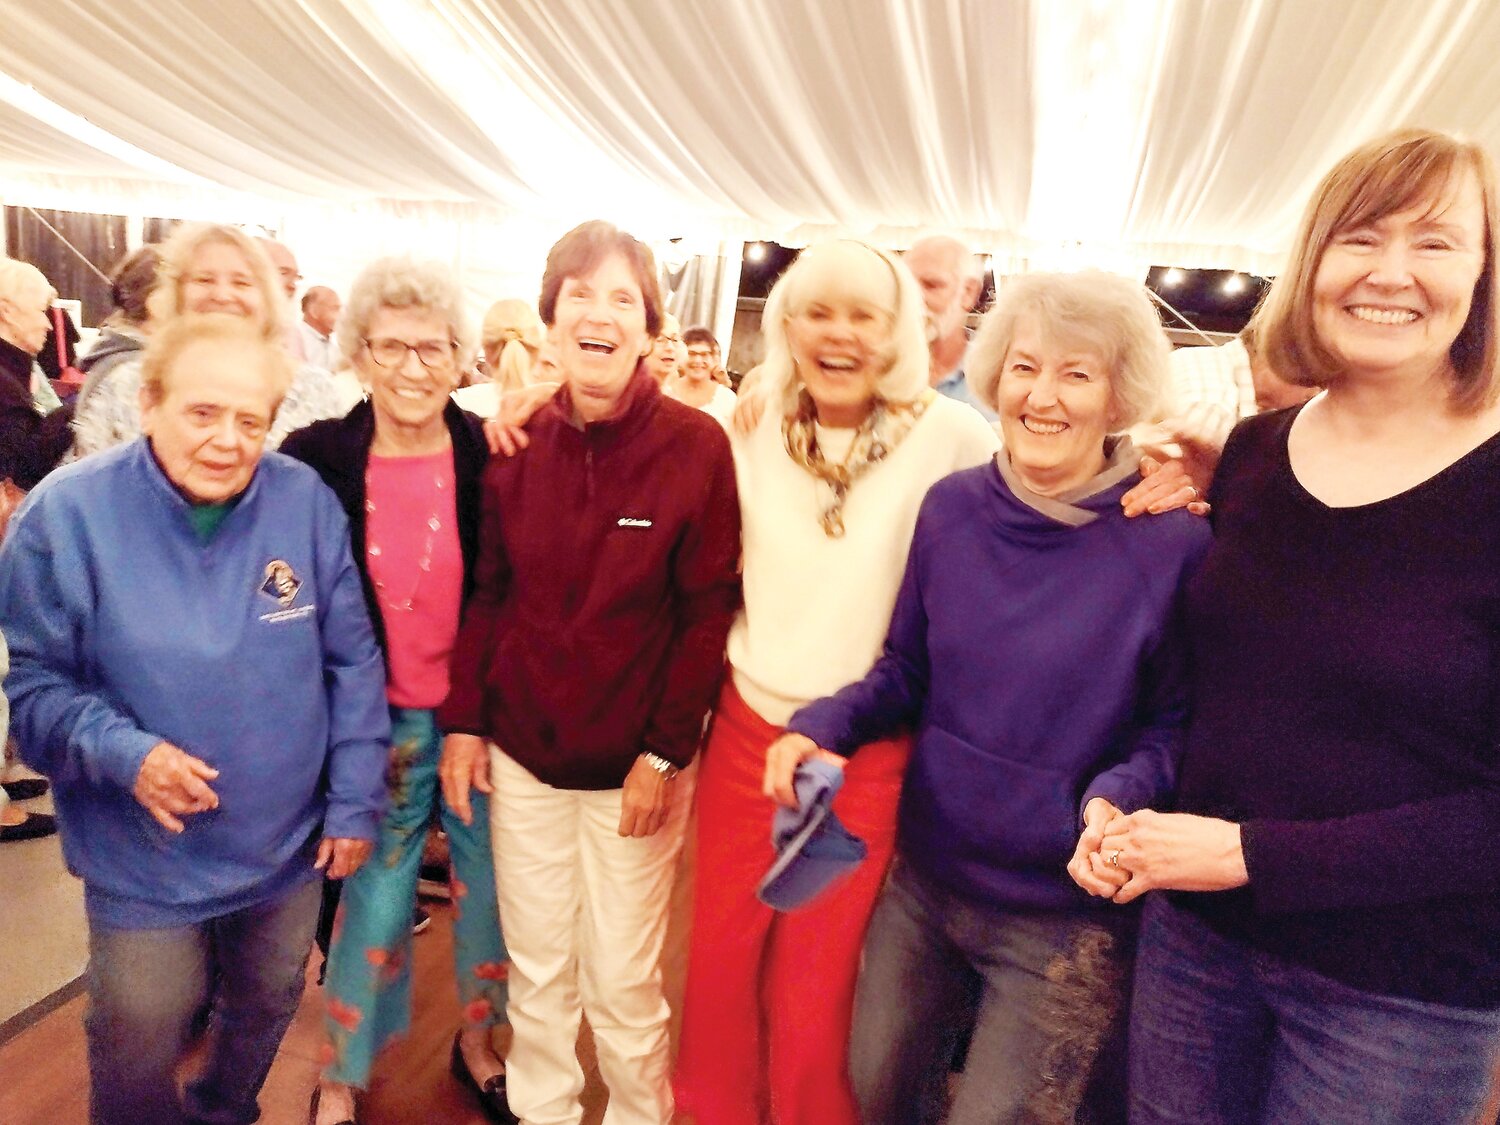 The Ladies of Mt. Carmel having fun at the Fabulous Greaseband Concert at the Crossing Vineyard and Winery Sept. 15.